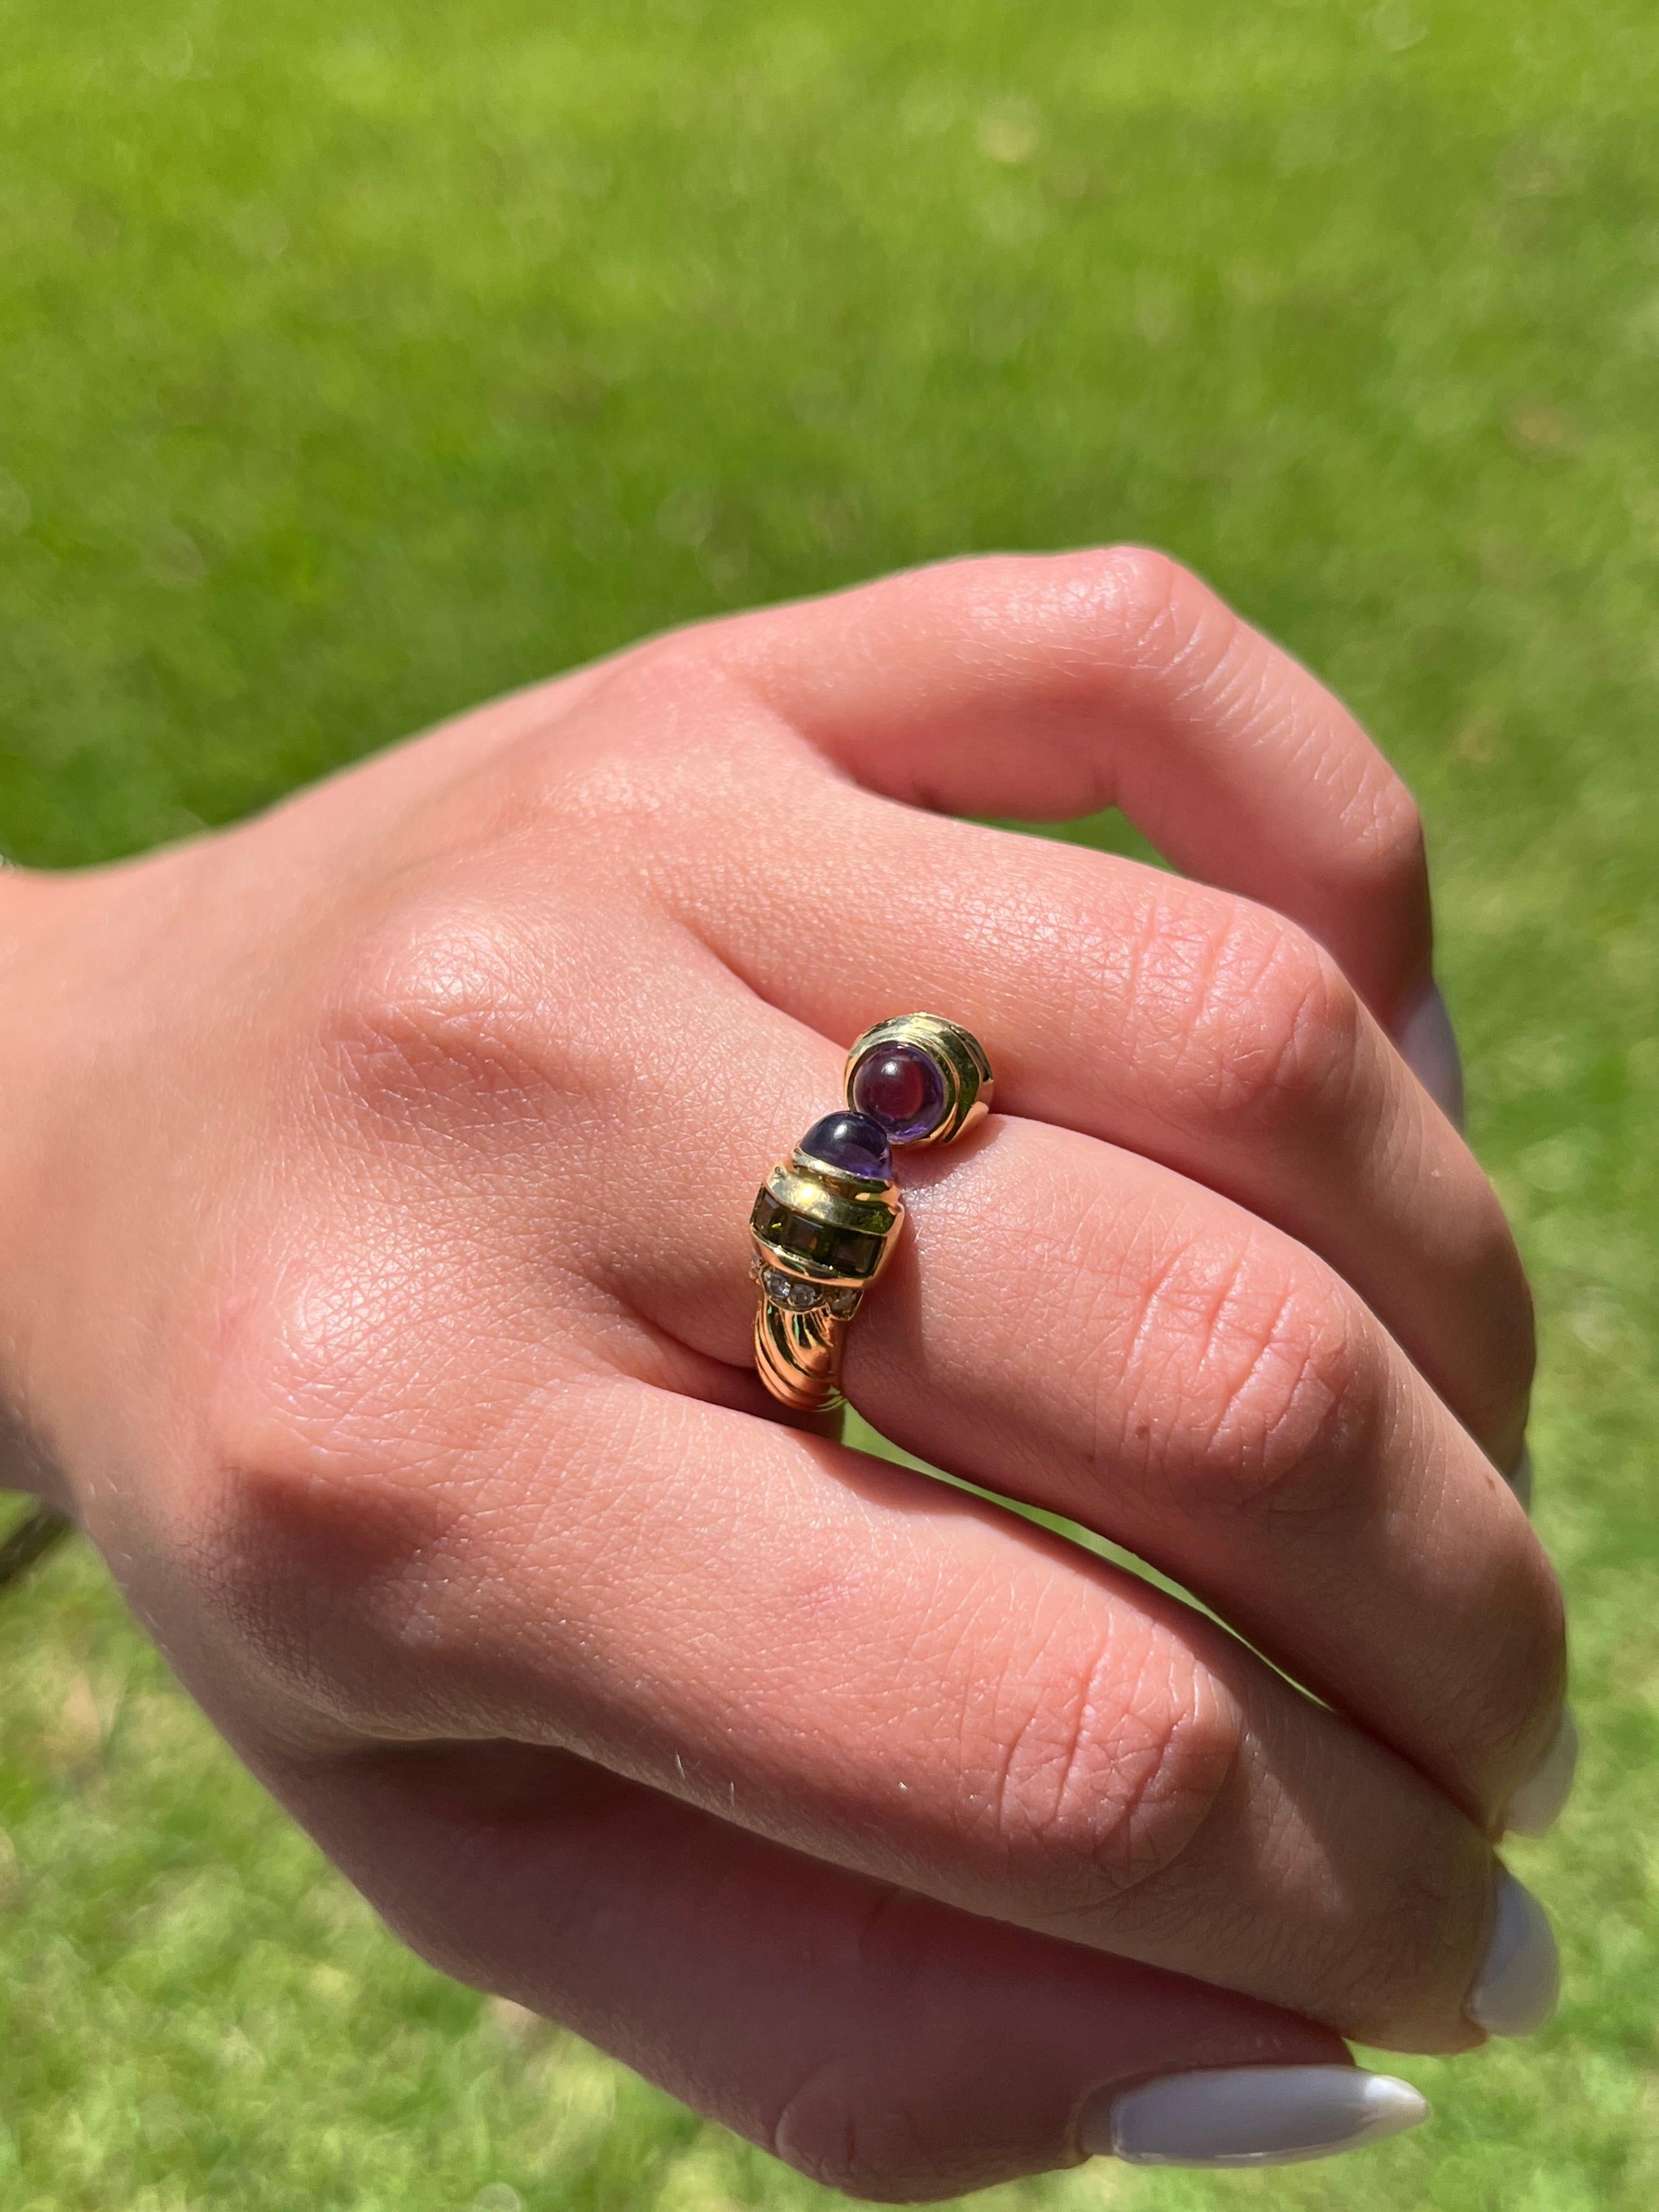 18k Gold Vintage Retro Open Ring with Amethyst, Peridot, and Diamonds In Excellent Condition For Sale In Miami, FL